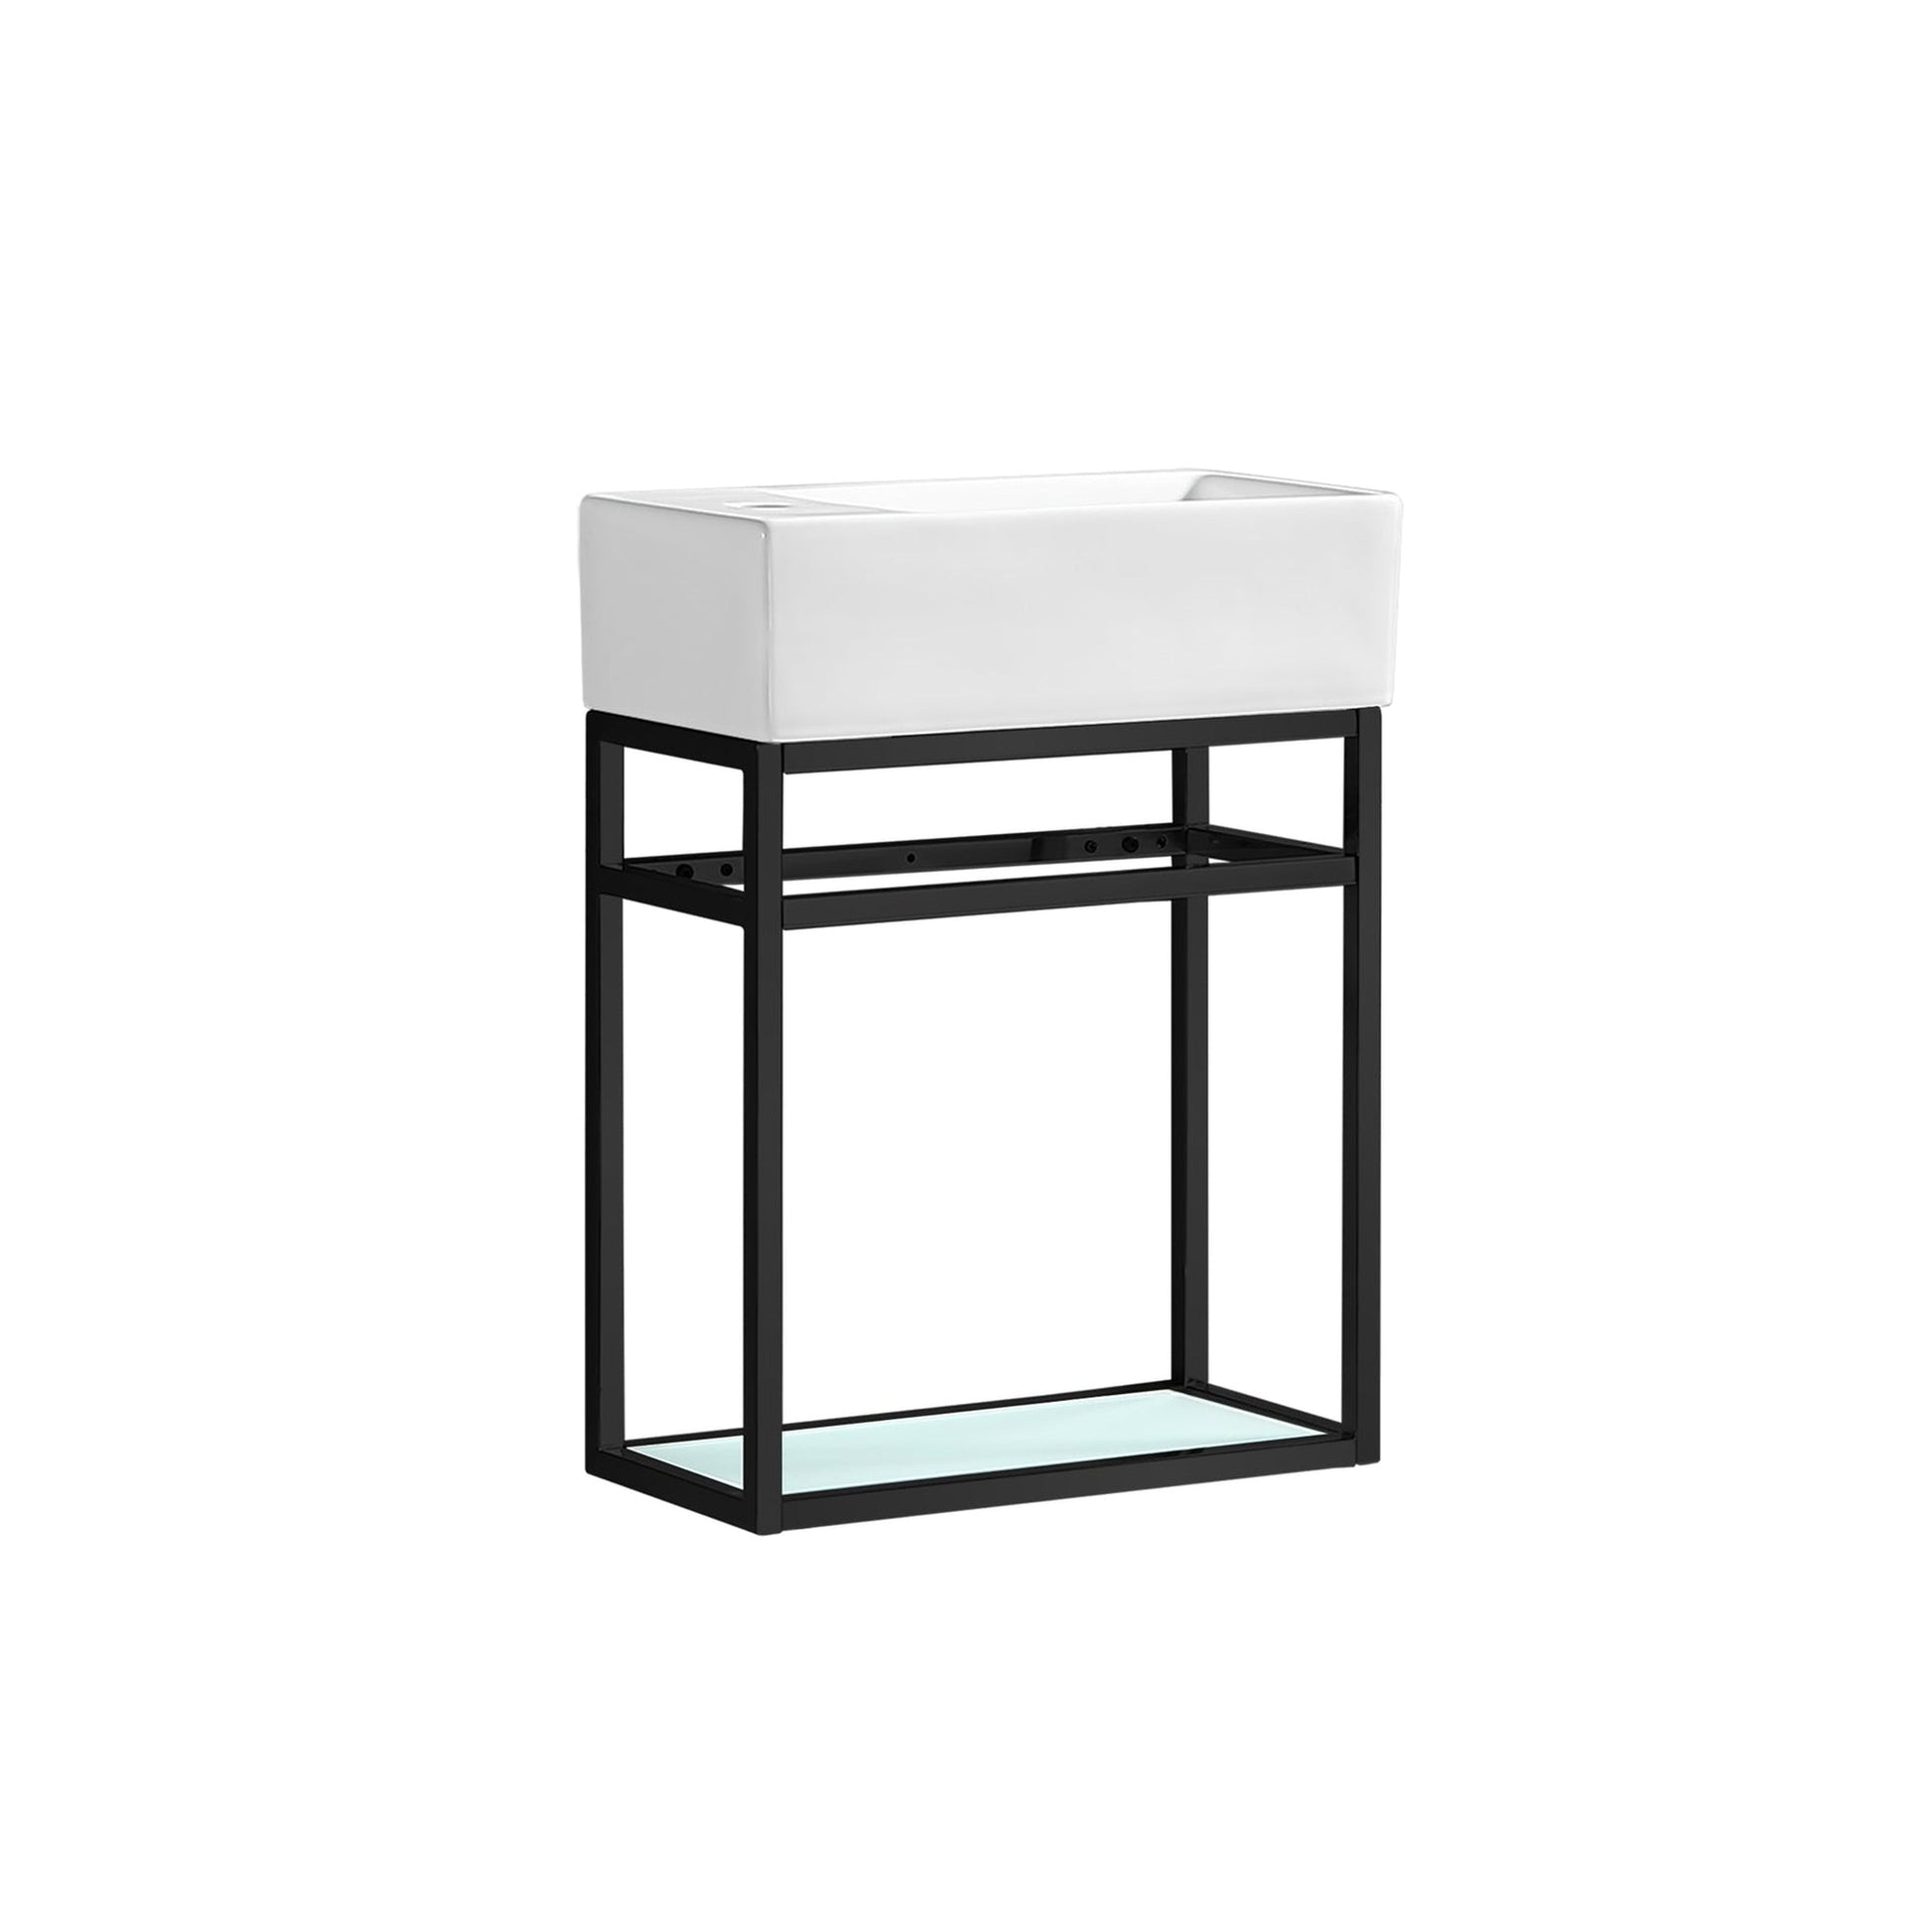 Swiss Madison Pierre 20" x 25" Wall-Mounted White Bathroom Vanity With Ceramic Single Sink and Black Metal Frame